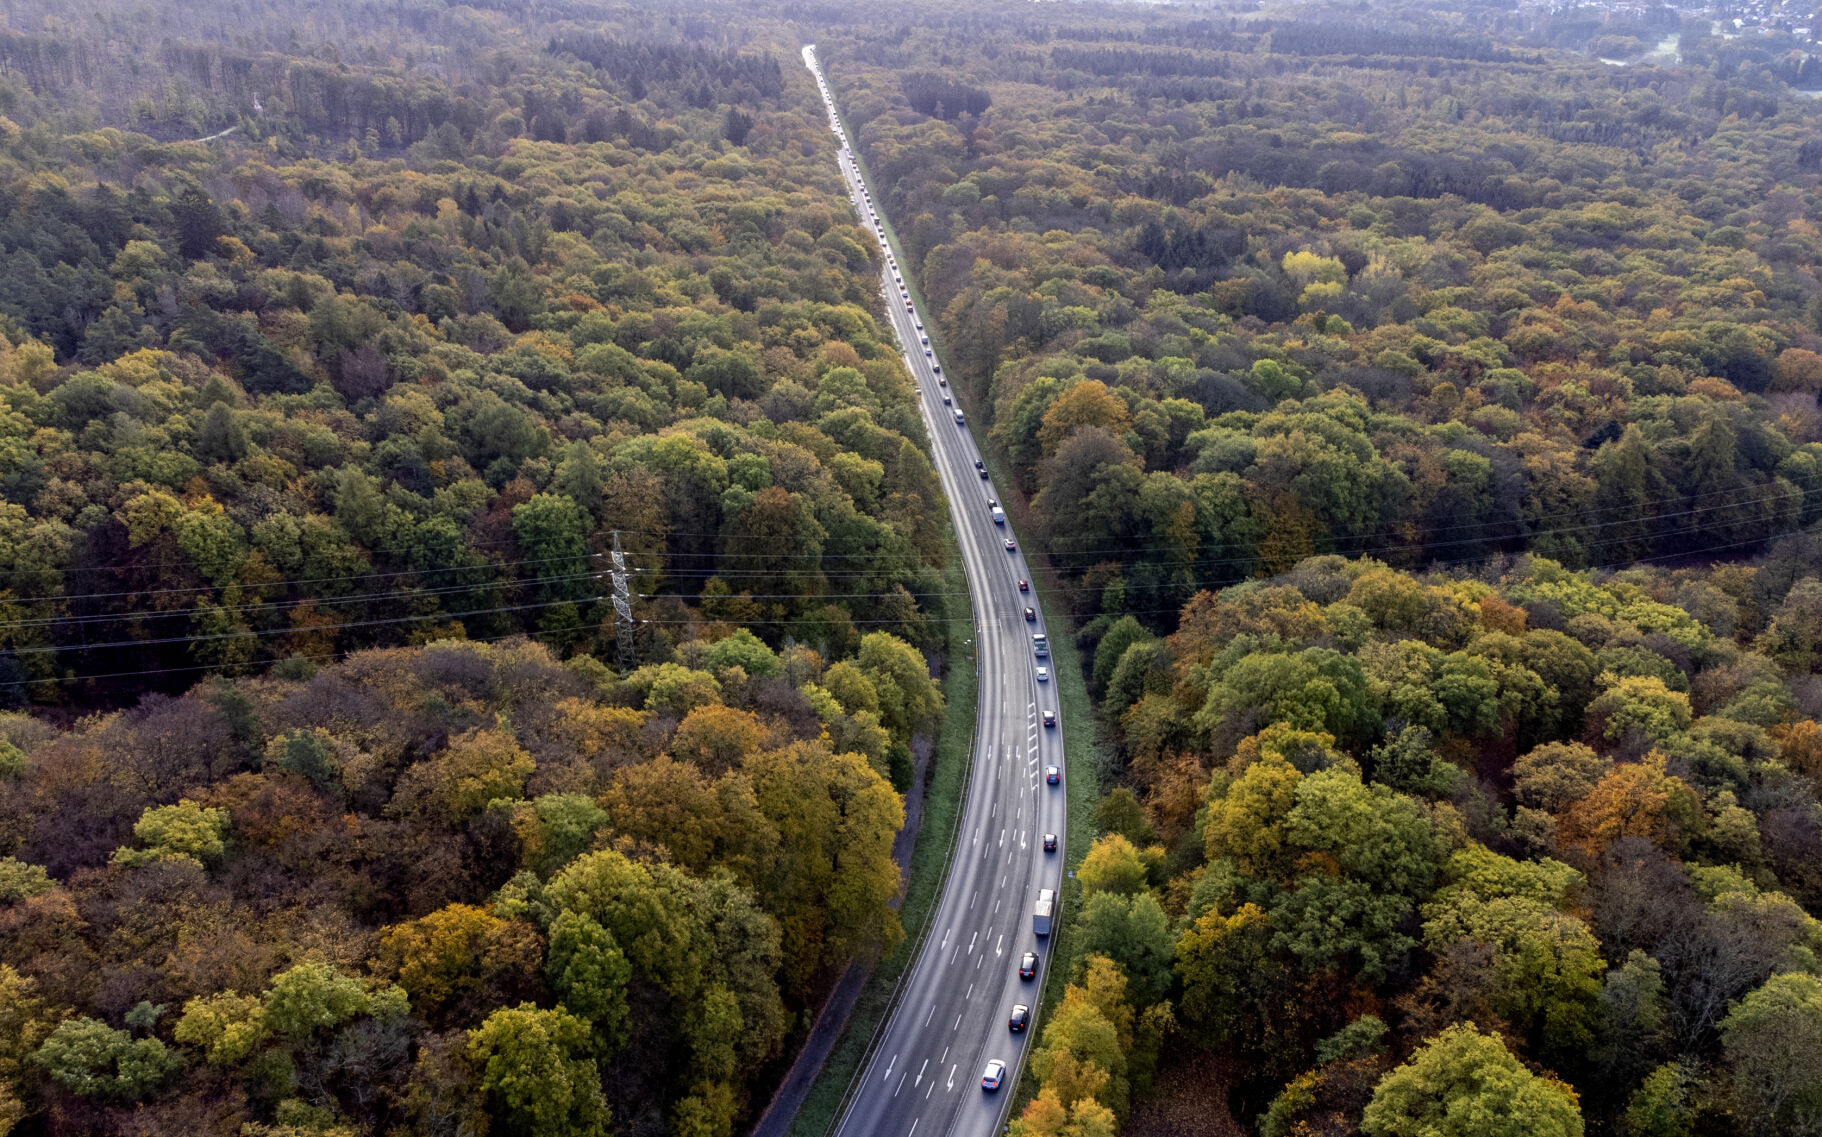 <p>Commmuters drive on one of the main roads from the forests of the Taunus region to the city of Frankfurt, Germany, Tuesday, Nov. 8, 2022. (AP Photo/Michael Probst)</p>   PHOTO CREDIT: Michael Probst - staff, AP